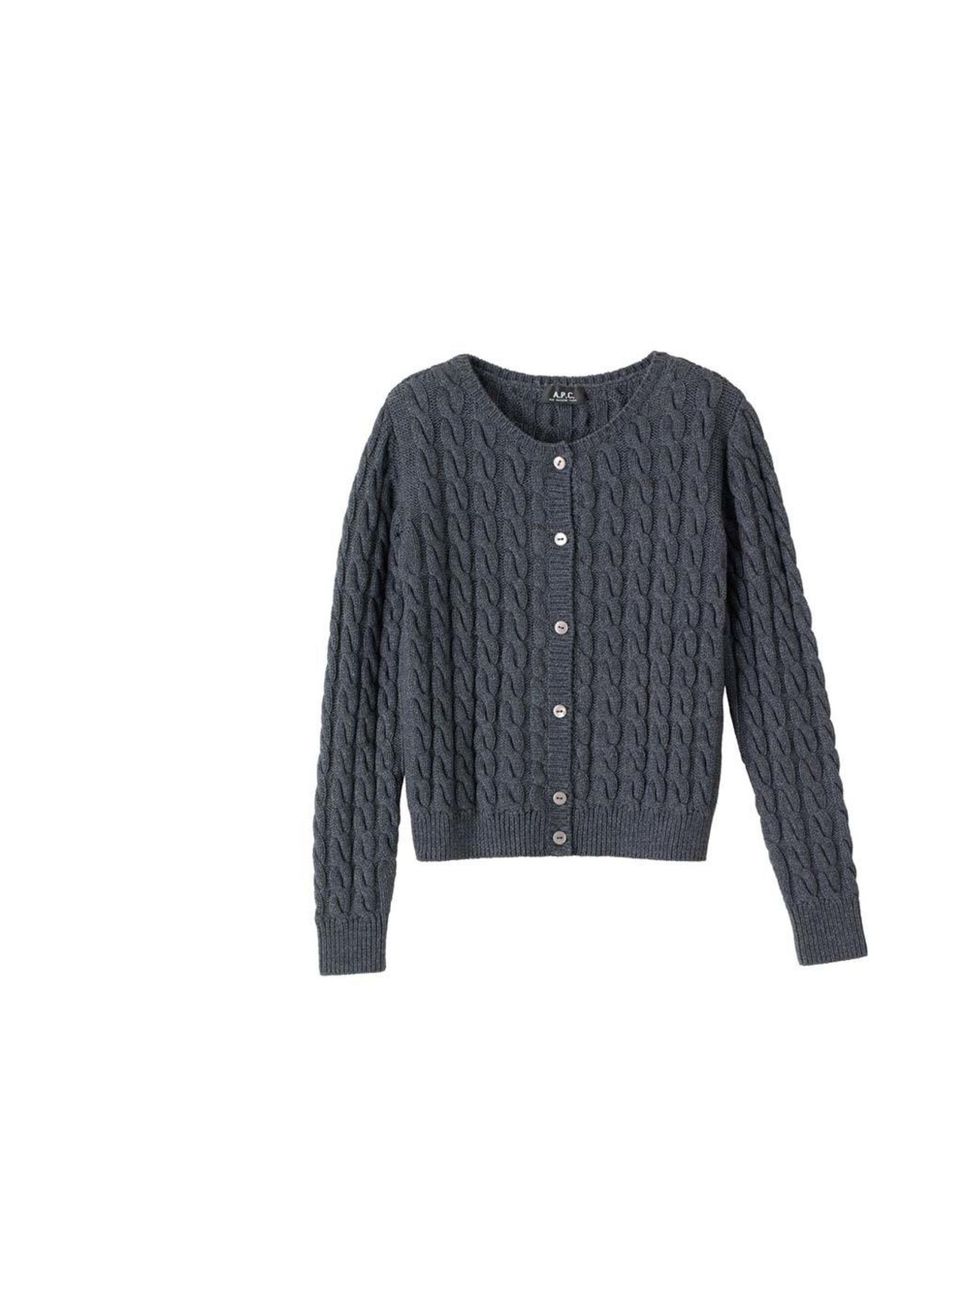 <p>Add a cable-knit cardigan into the mix for a more textured, layered outfit. We love this preppy crew neck in school uniform grey... <a href="http://www.apc.fr/wwuk/women/cardigans/little-cardigan-in-thick-cotton_pFVDD0007/colour-heathered-blue-grey_dBA